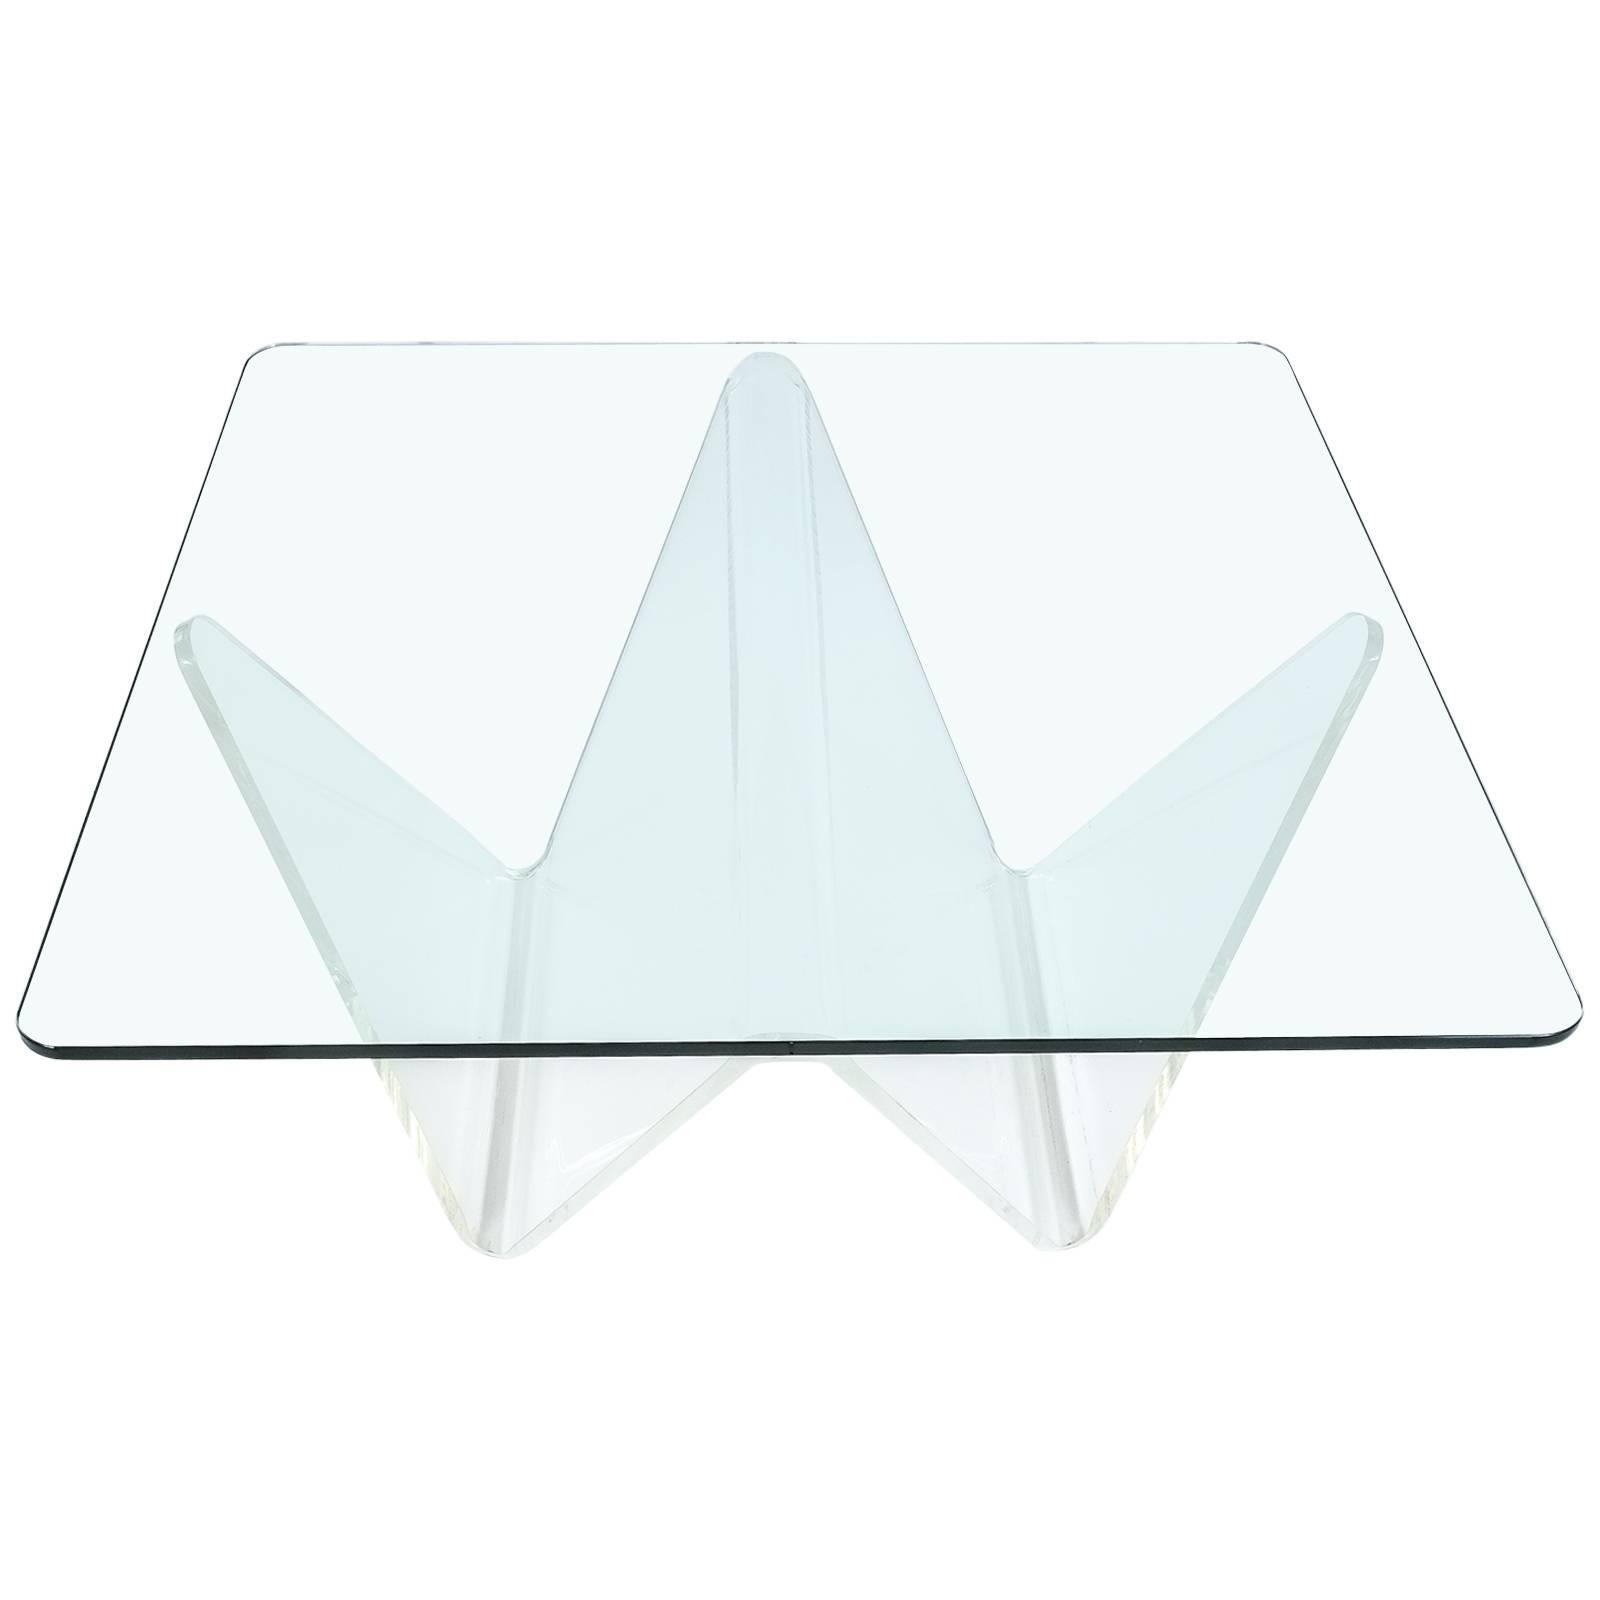 Large Lucite and Glass Wave Table, circa 1960 For Sale